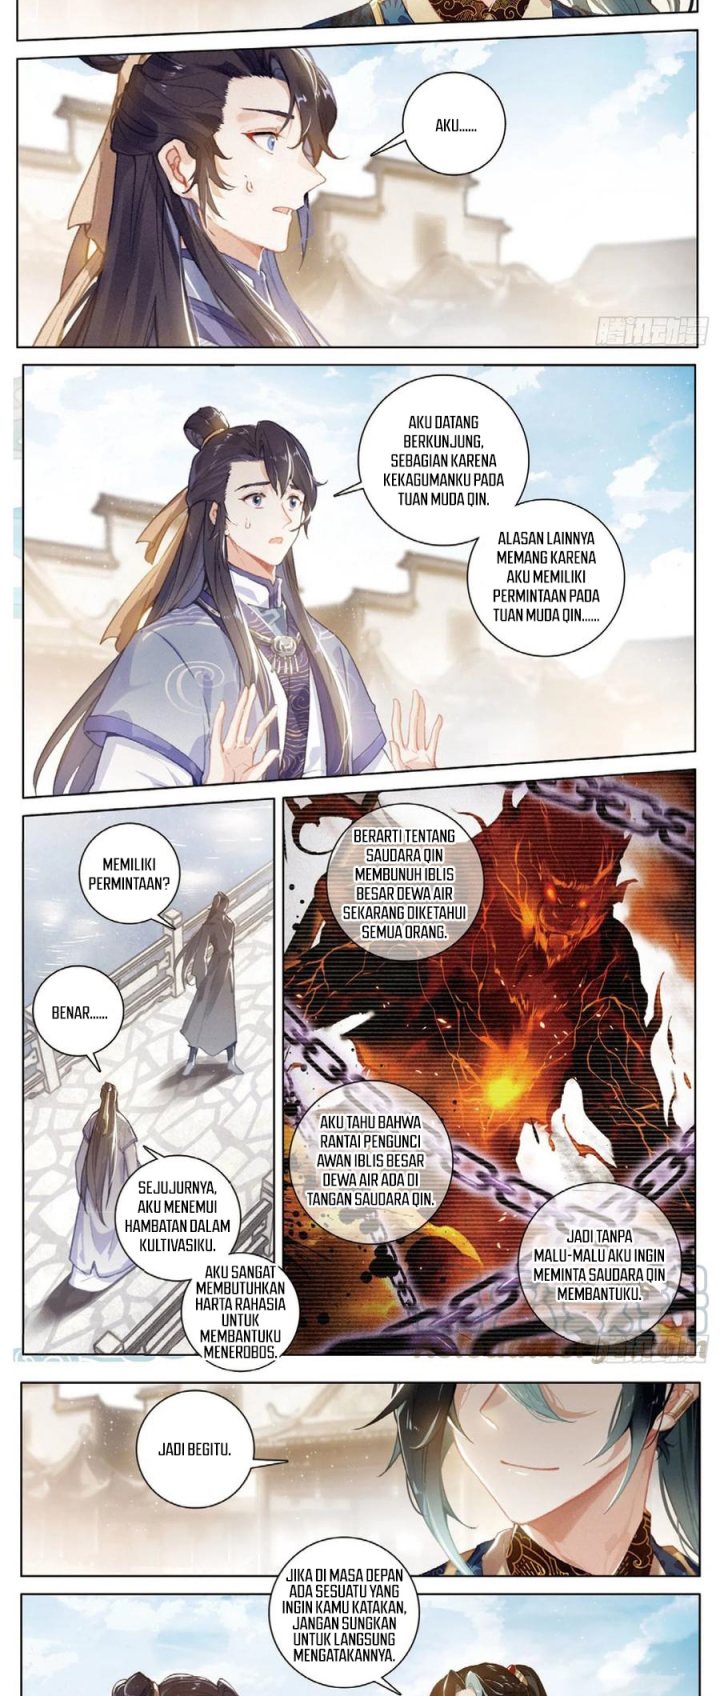 Soaring Sword Odyssey Chapter 30